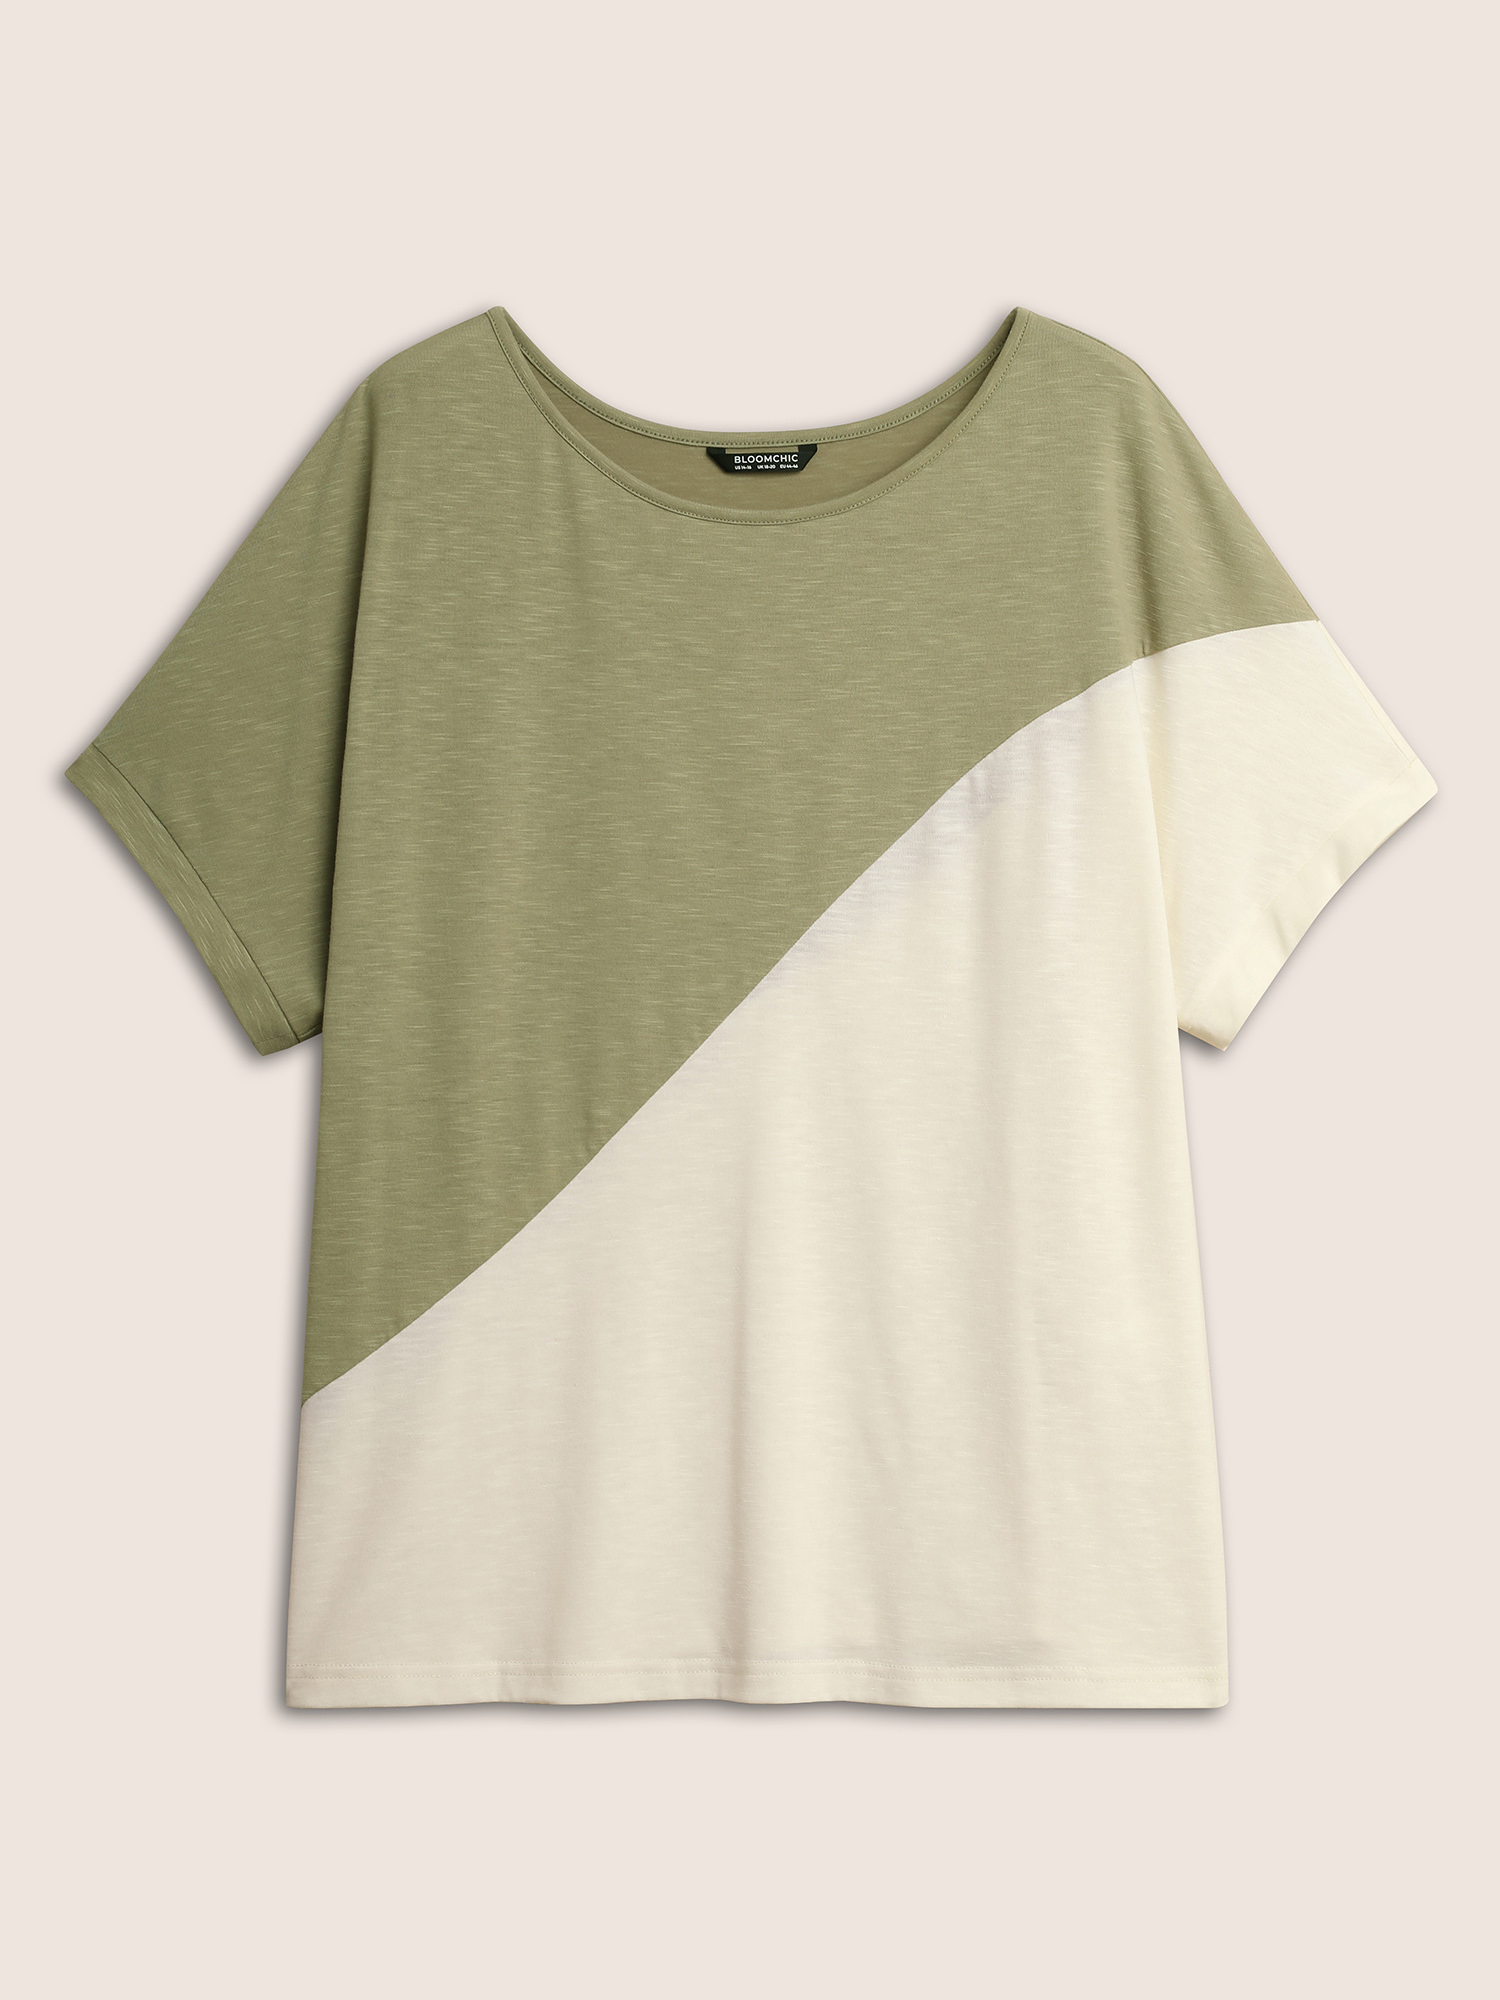 

Plus Size Two Tone Heather Batwing Sleeve T-shirt ArmyGreen Women Casual Contrast Round Neck Everyday T-shirts BloomChic